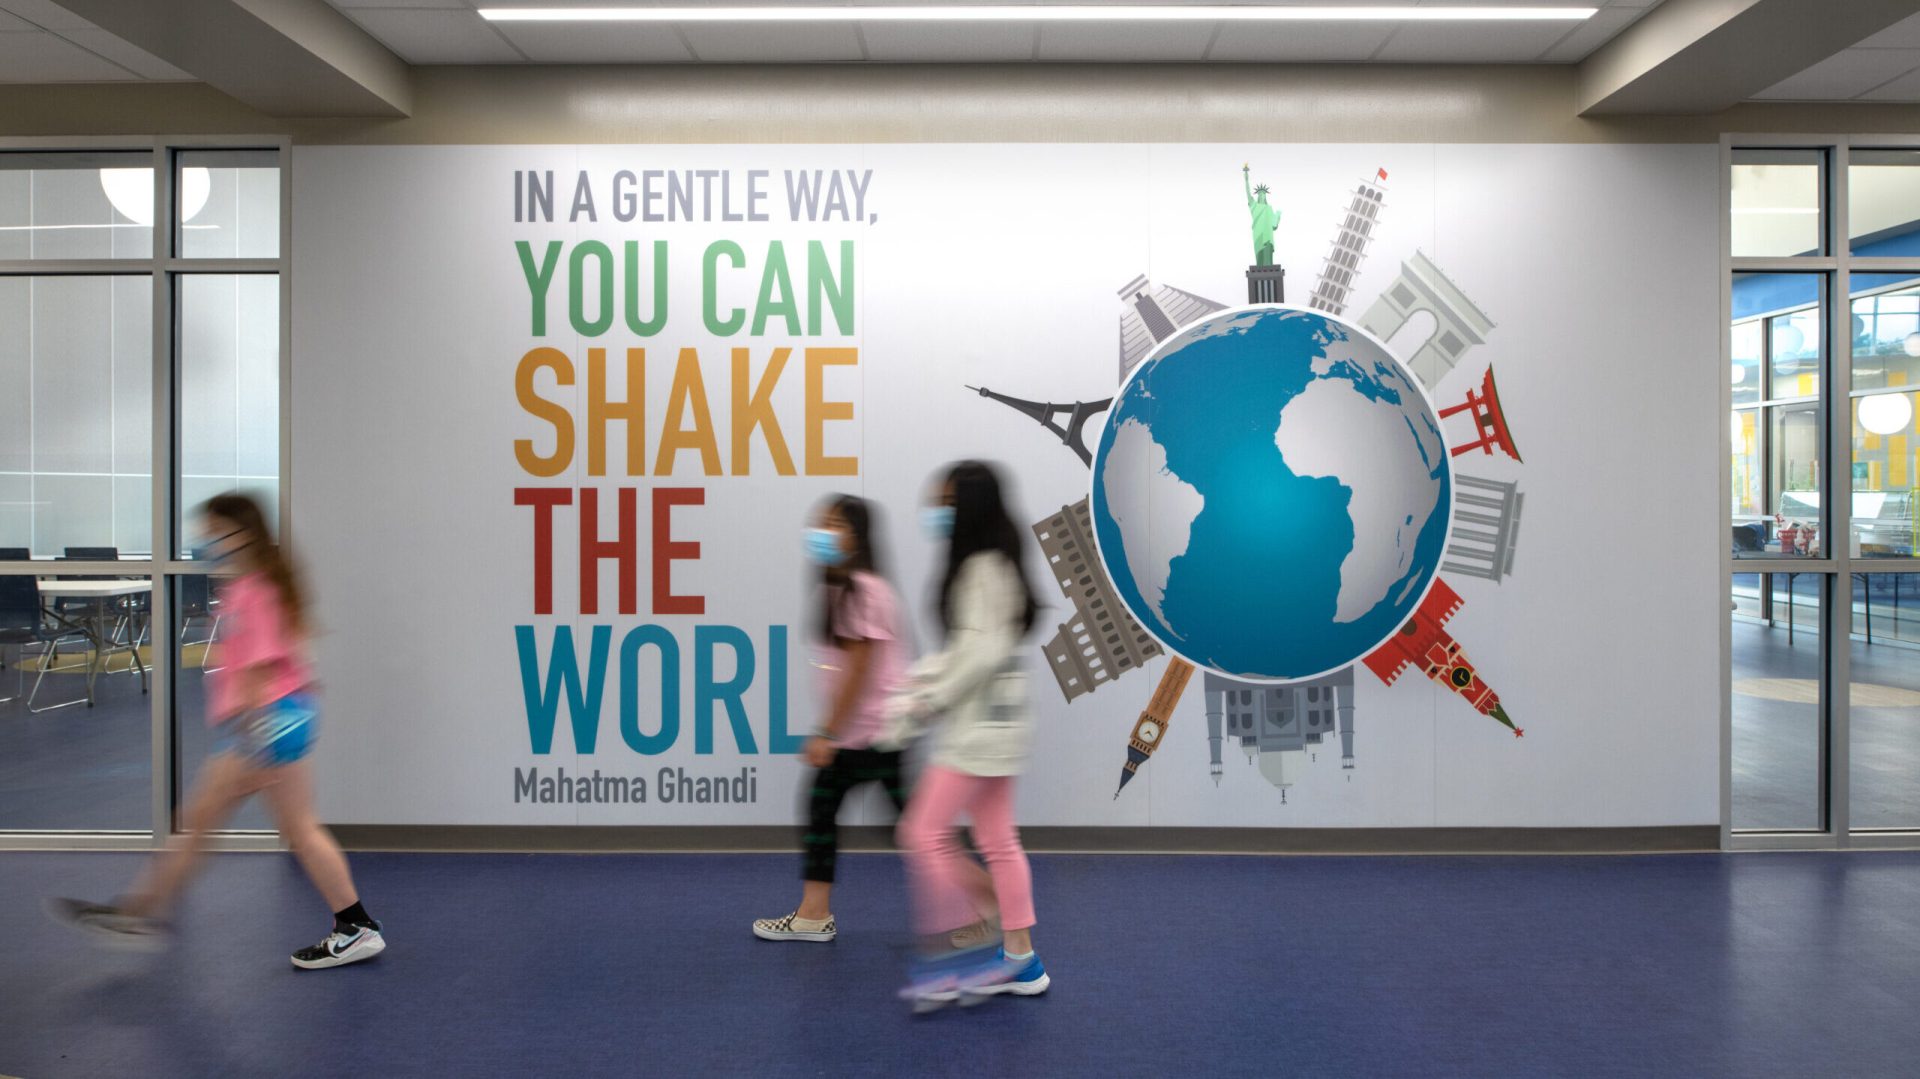 Wall Mural at the Harvery Schools in Houston ISD